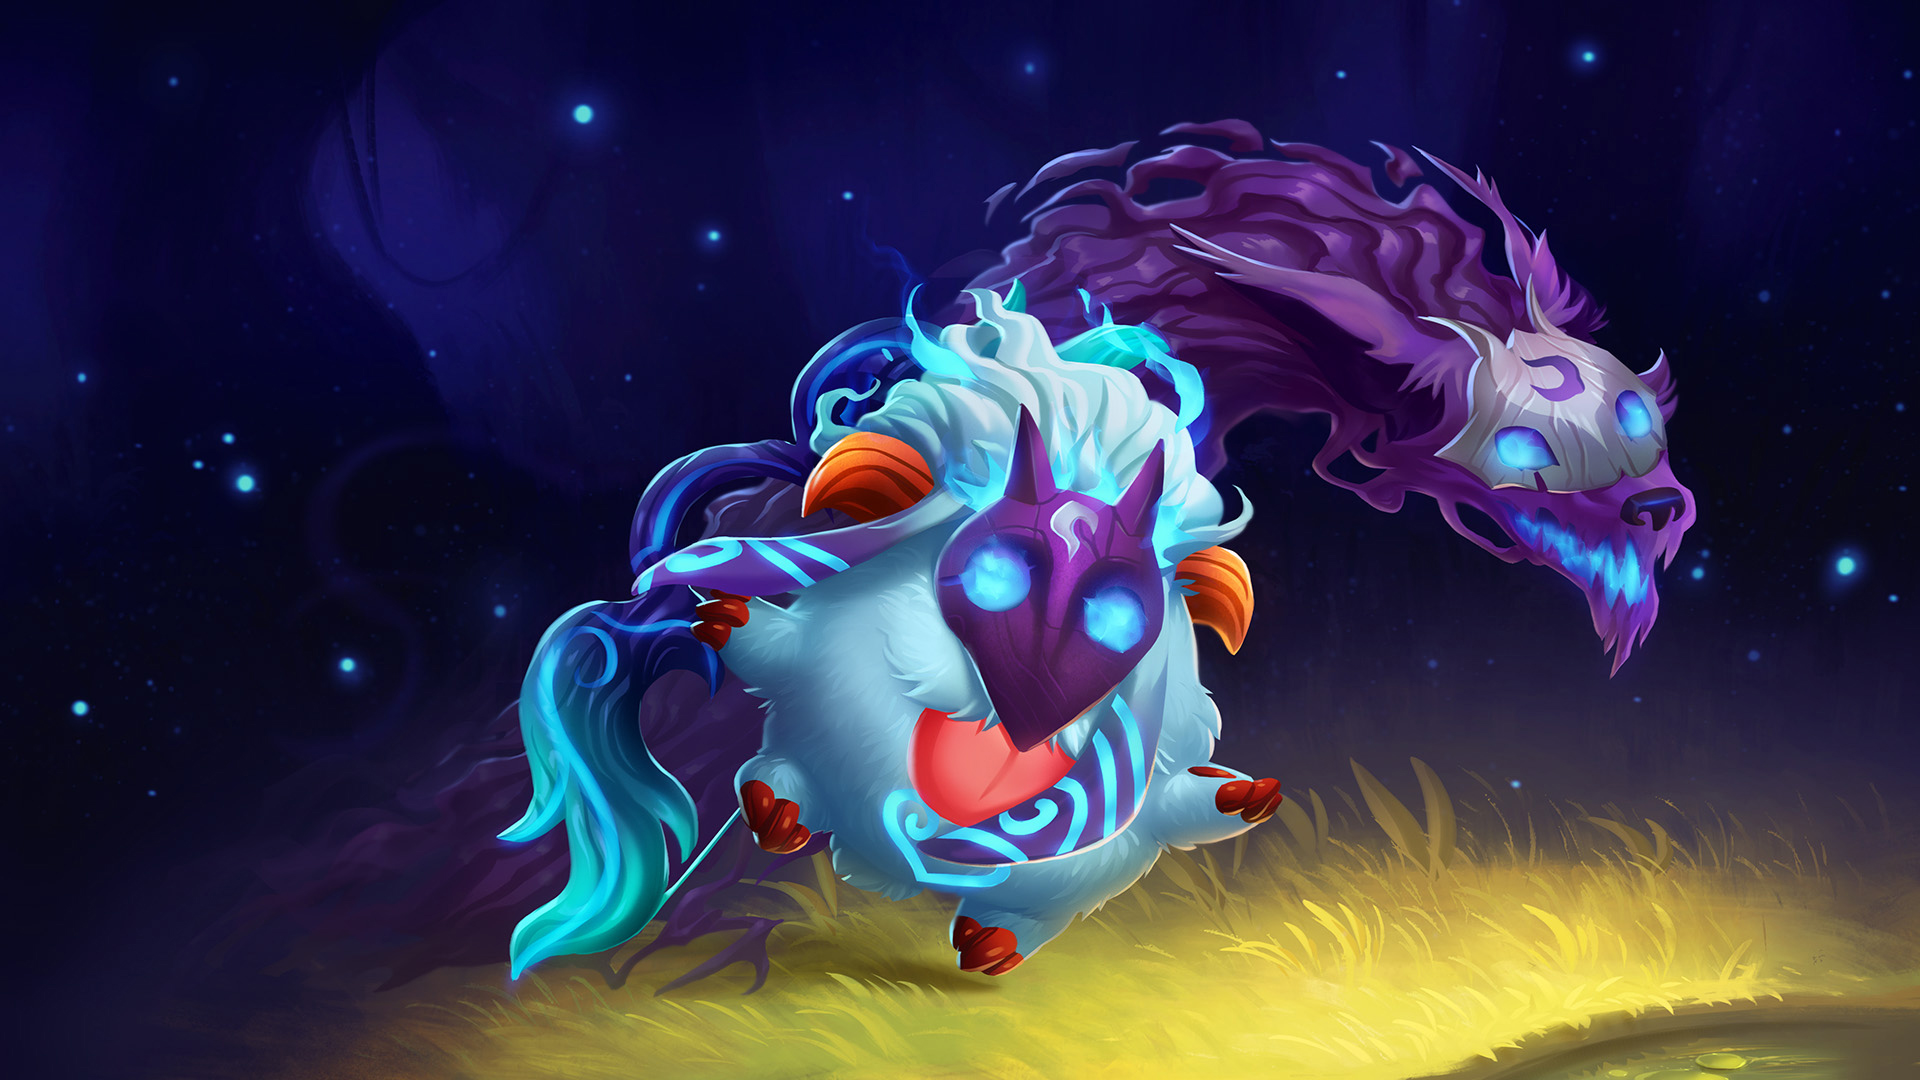 Poro Kindred Wallpaper - League Of Legends Kindred Poro , HD Wallpaper & Backgrounds